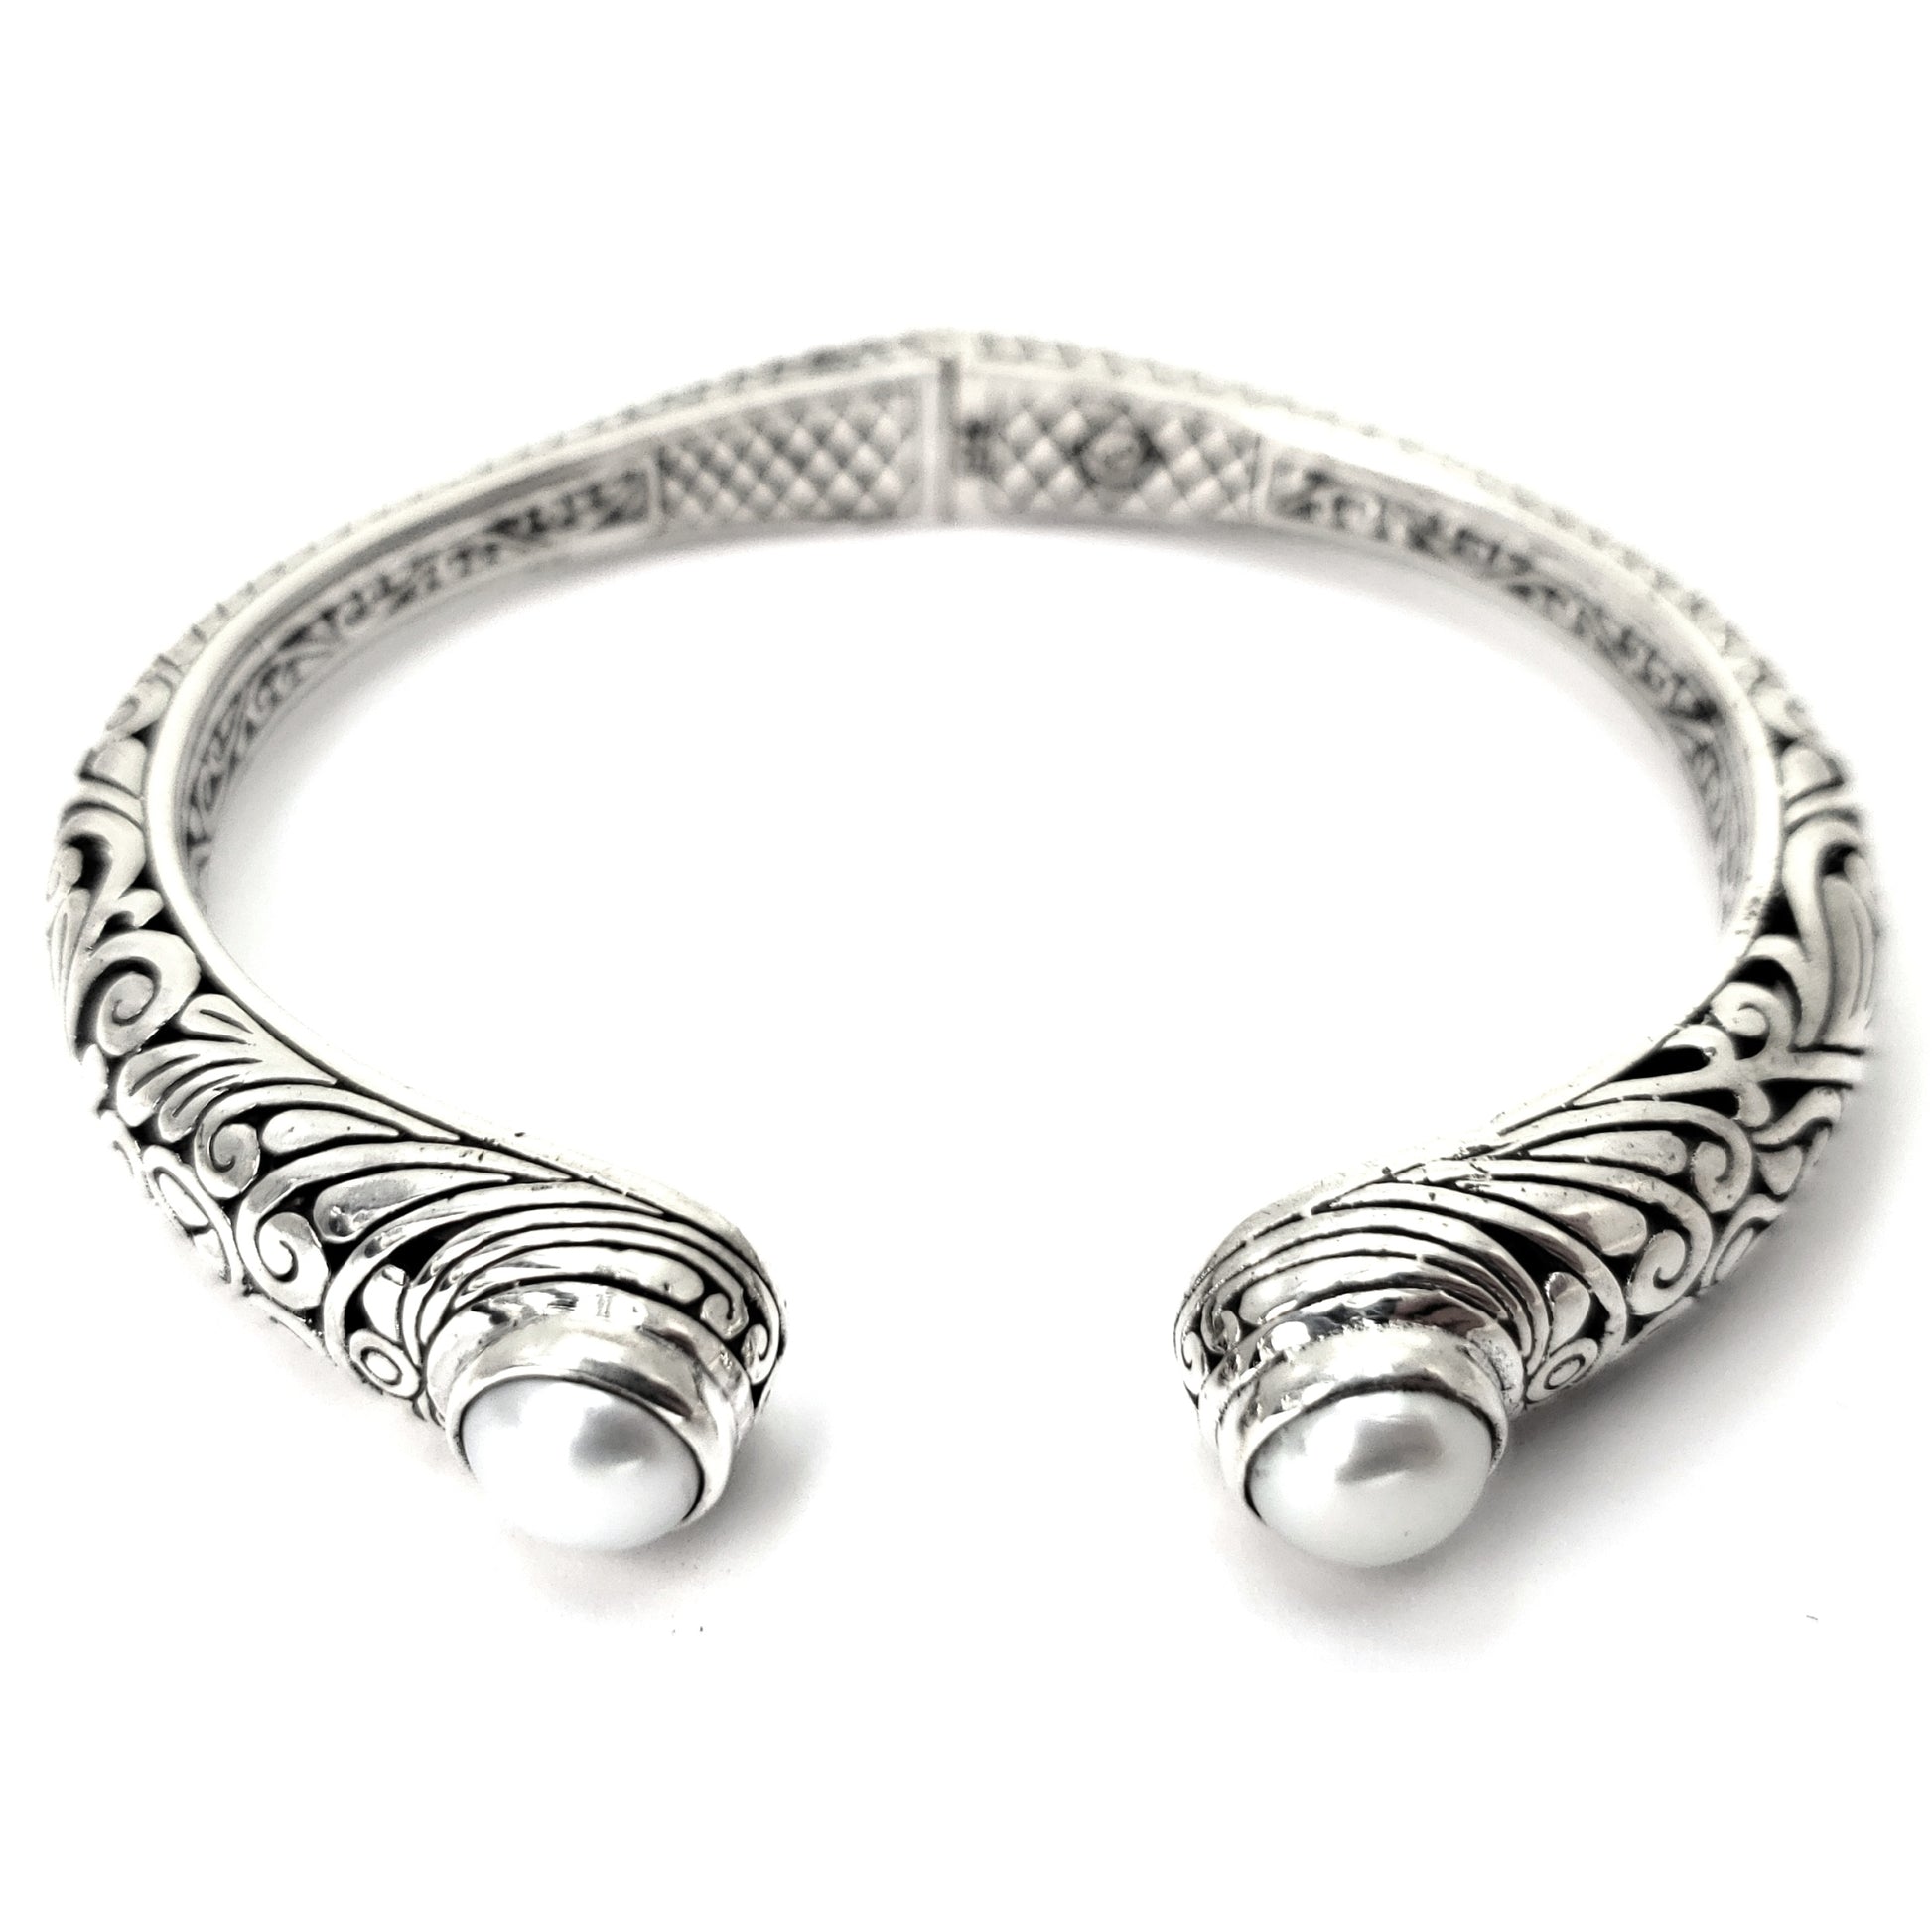 Hinged silver cuff bracelet with carved filigree design and two pearls.